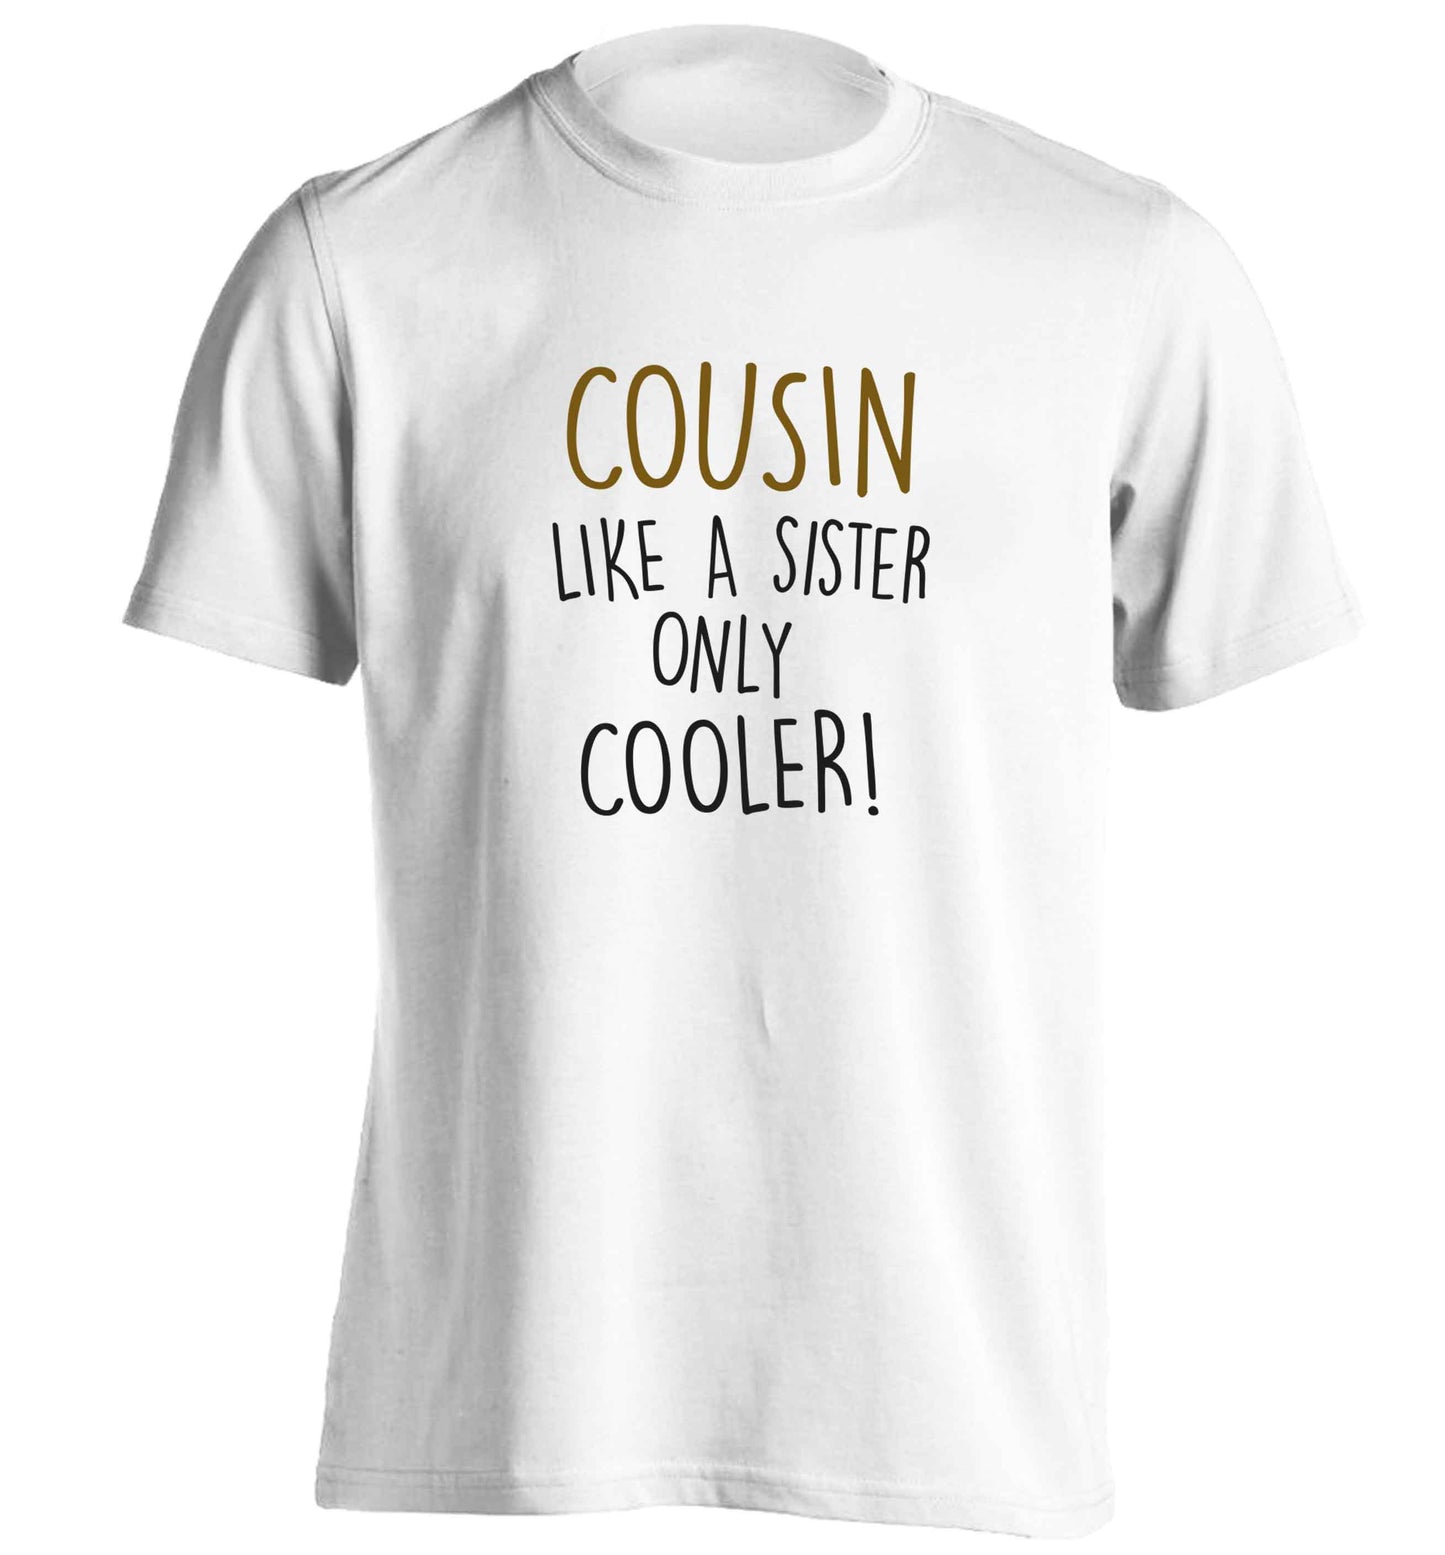 Cousin like a sister only cooler adults unisex white Tshirt 2XL